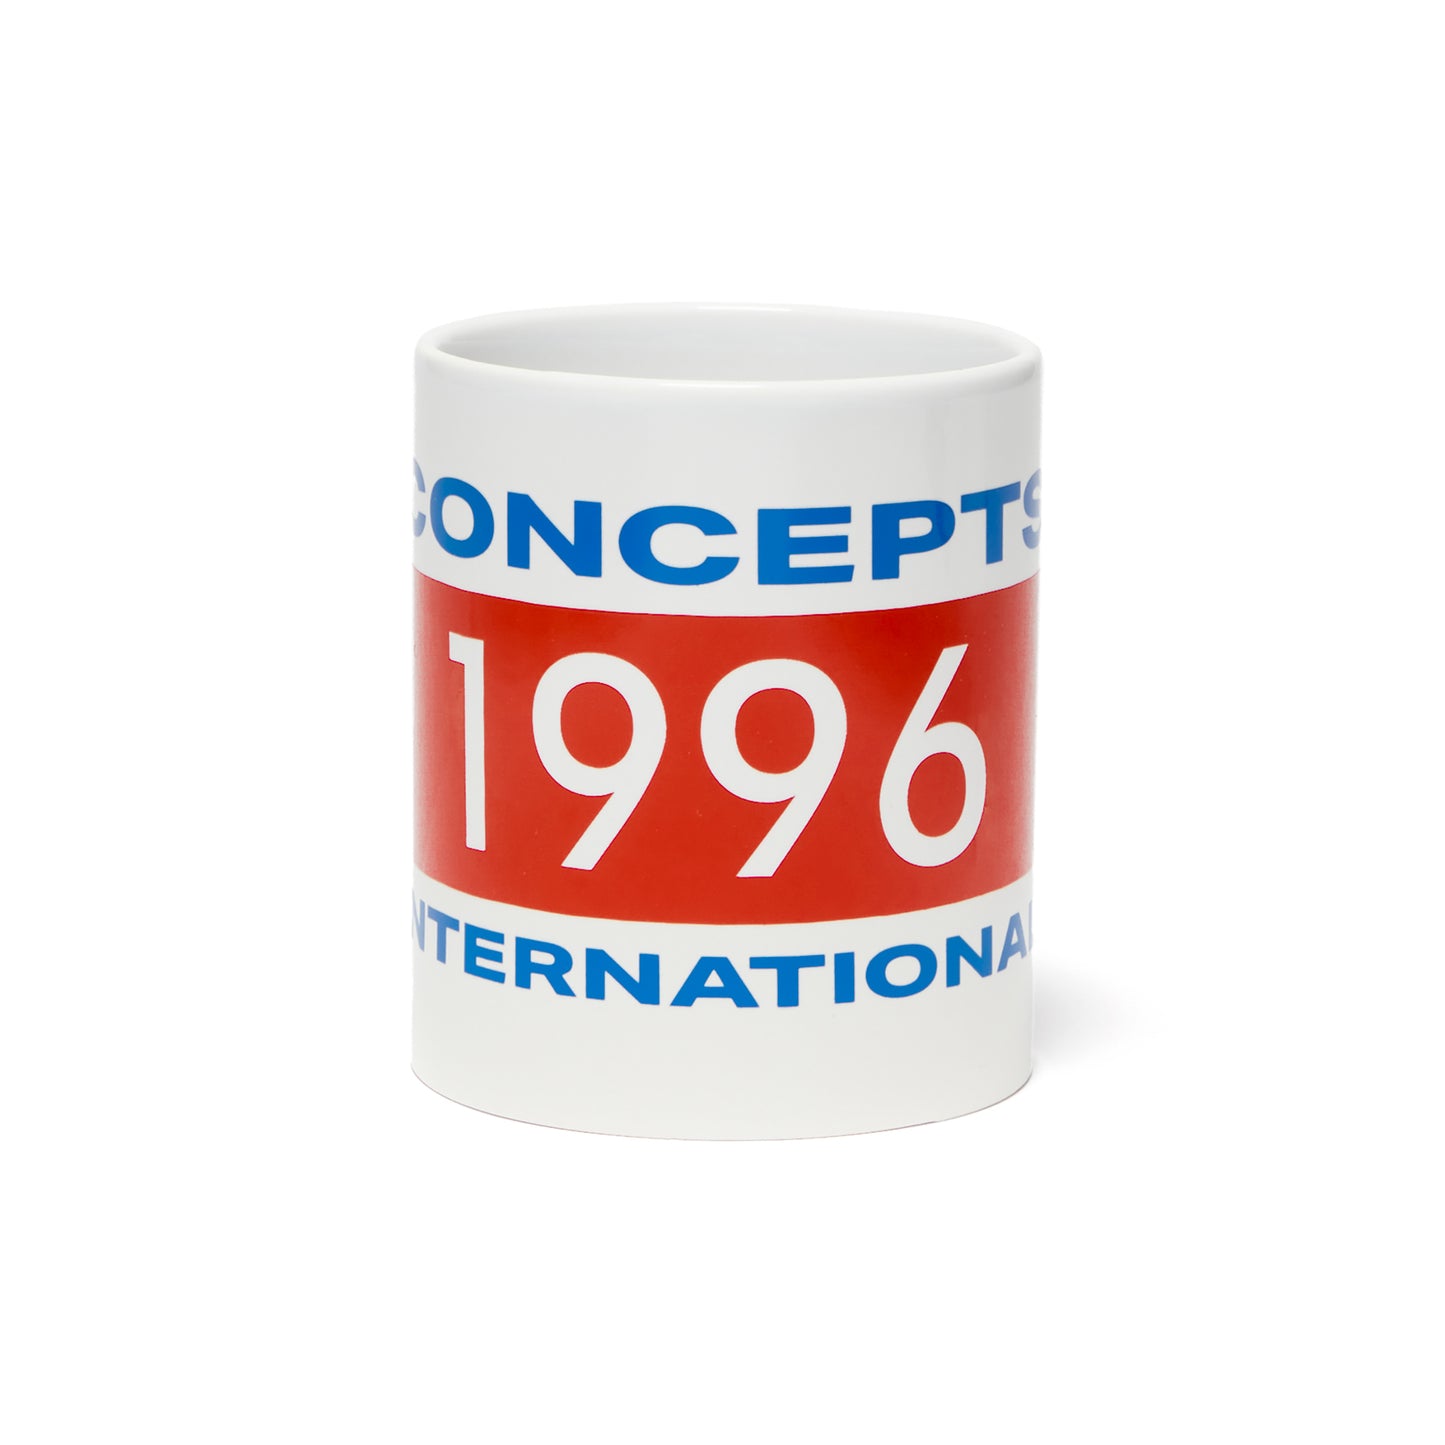 Concepts Intl 1996 Coffee Cup (White)